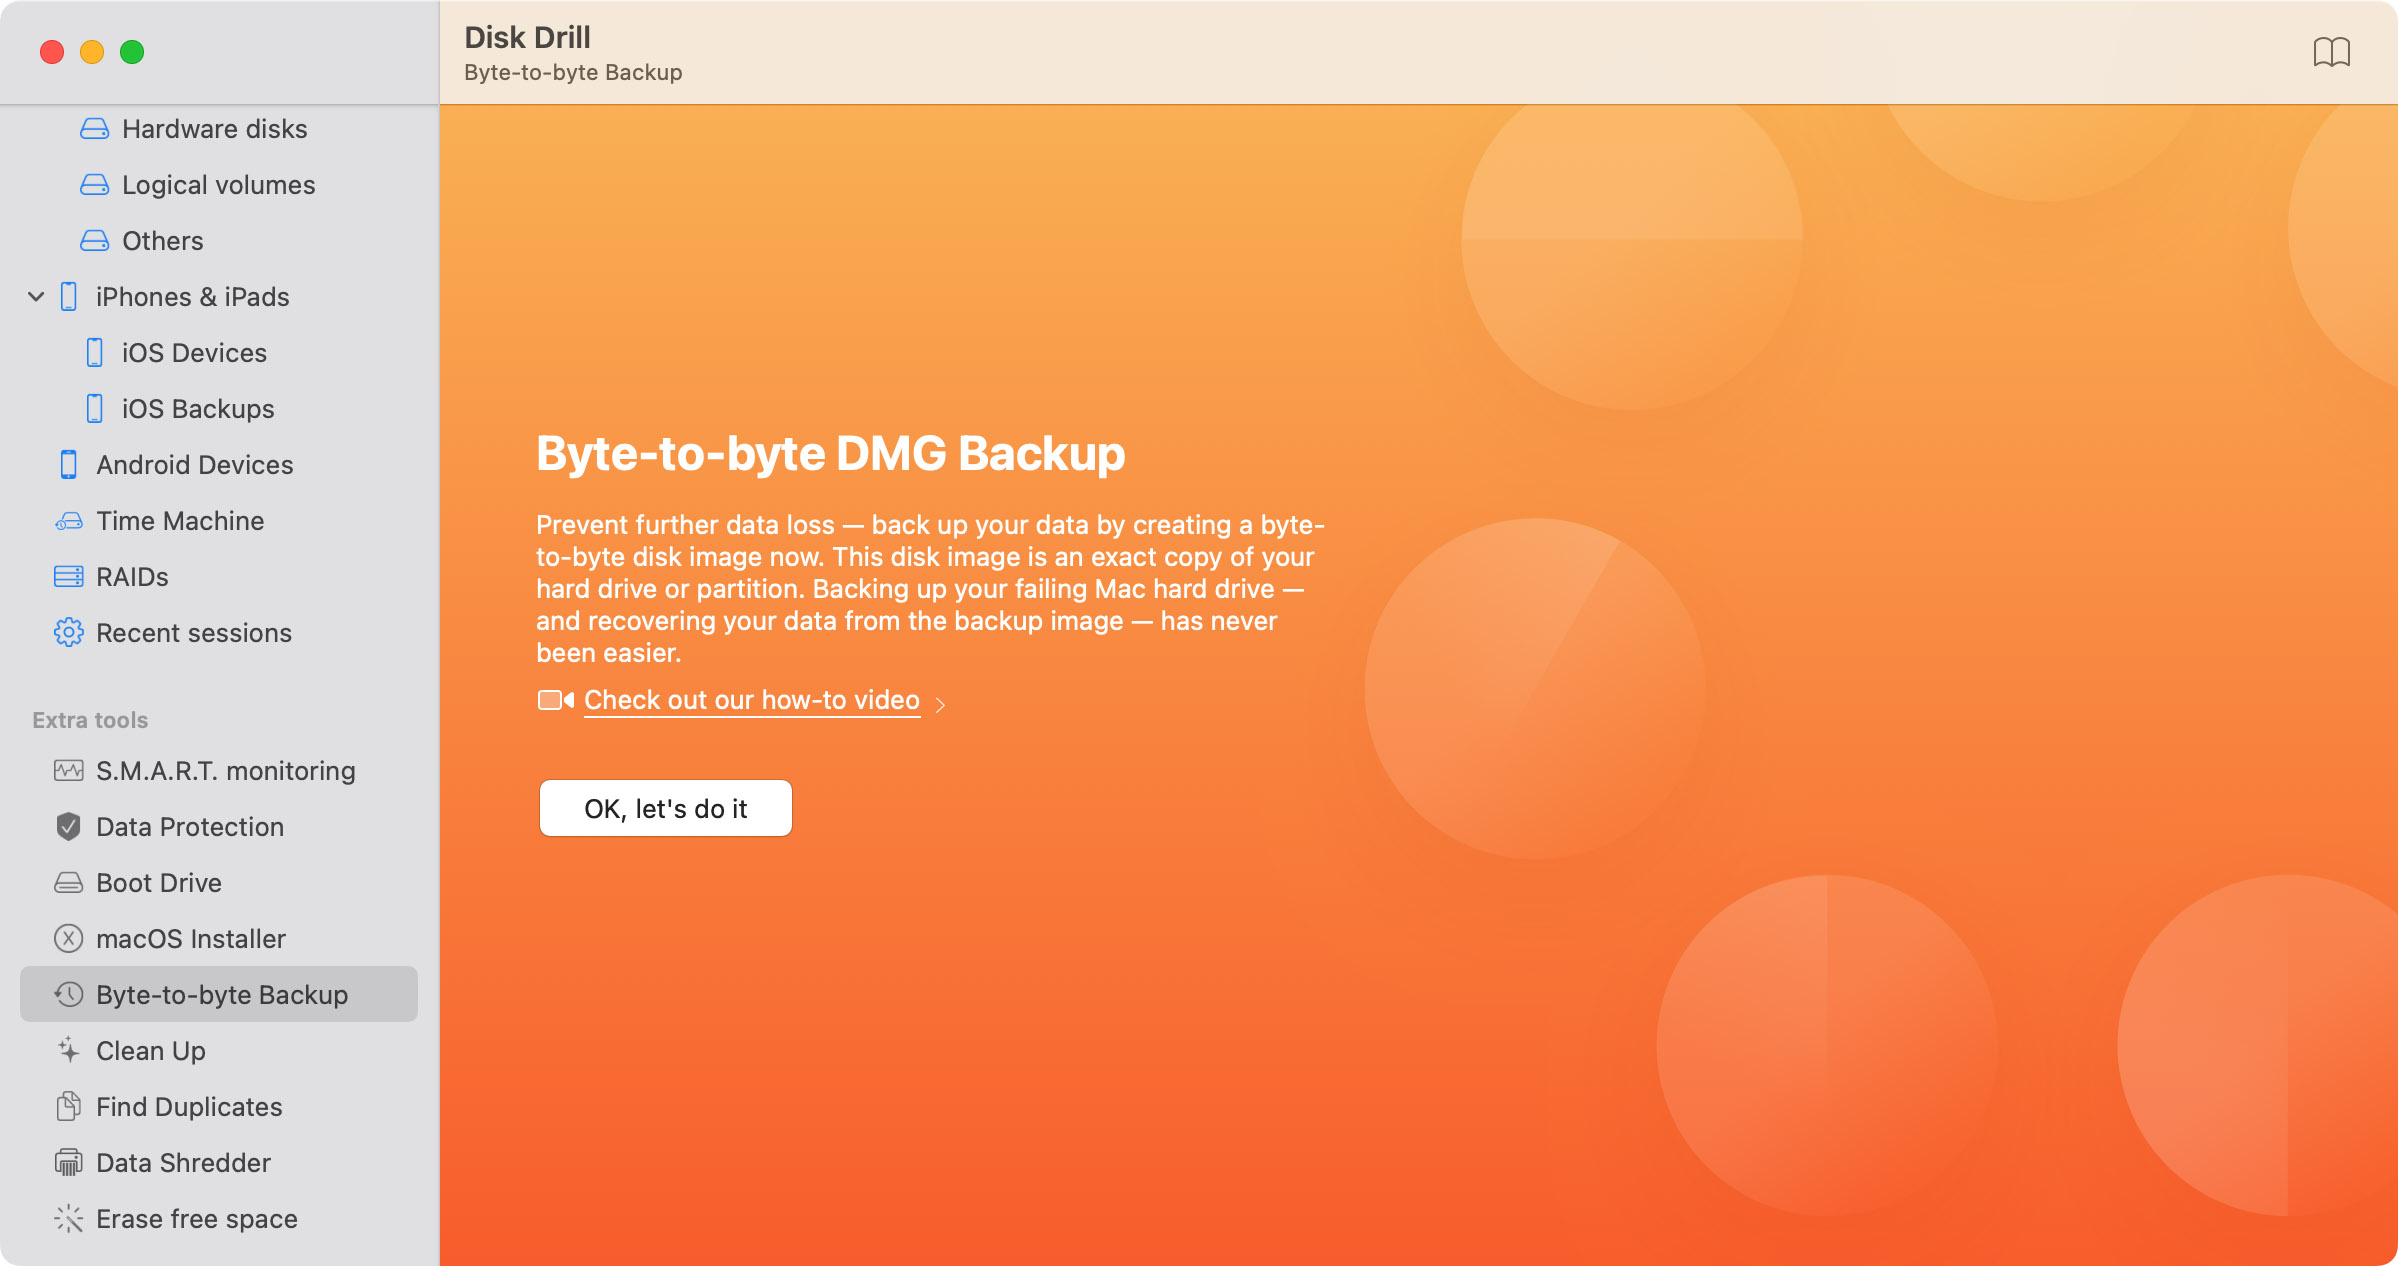 How to Backup Data on a Mac Disk